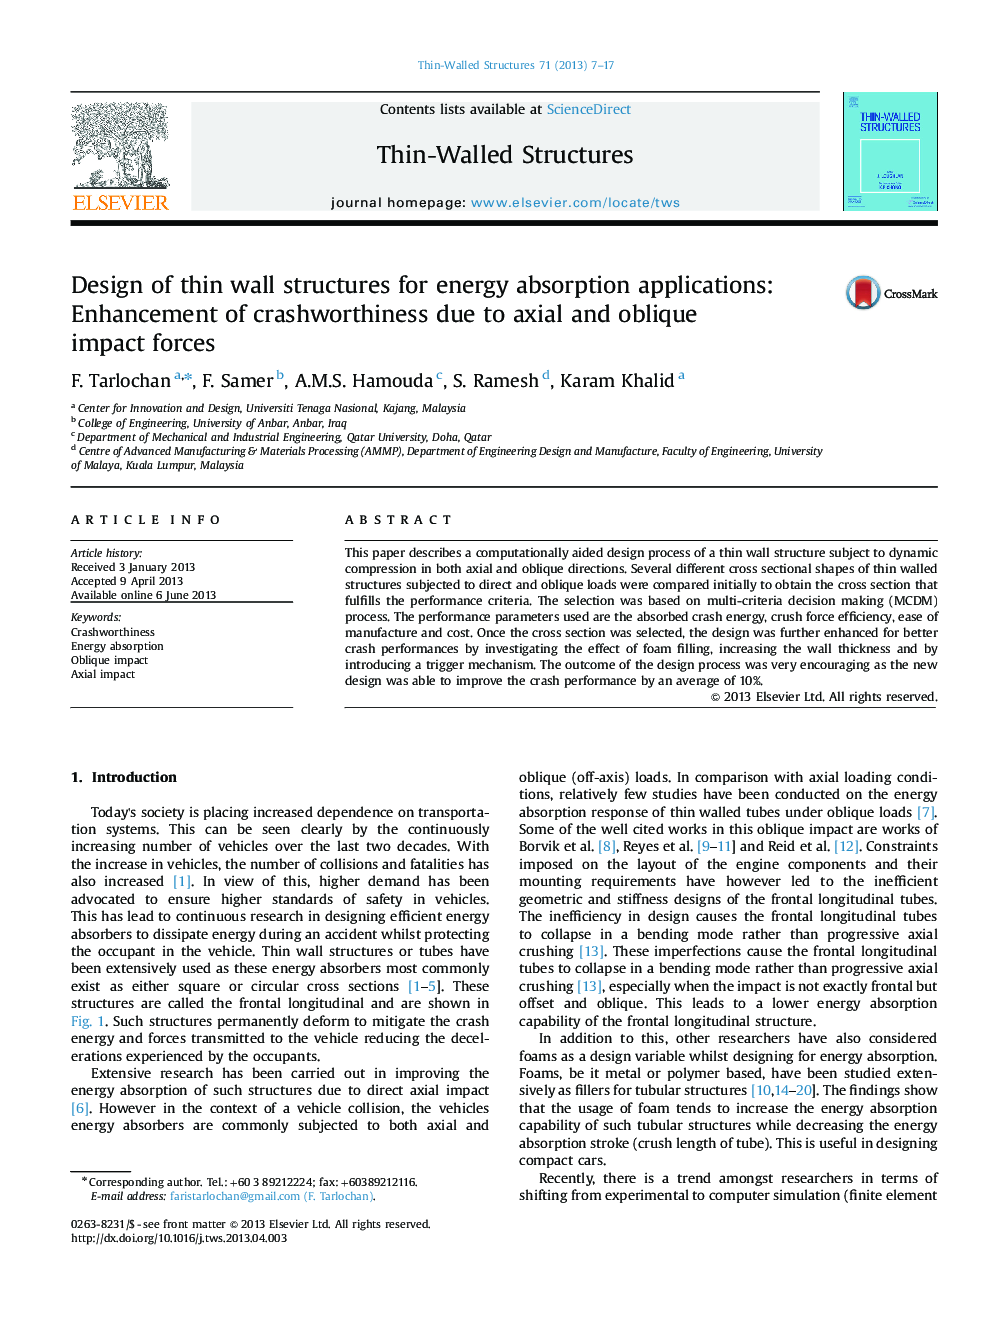 Design of thin wall structures for energy absorption applications: Enhancement of crashworthiness due to axial and oblique impact forces